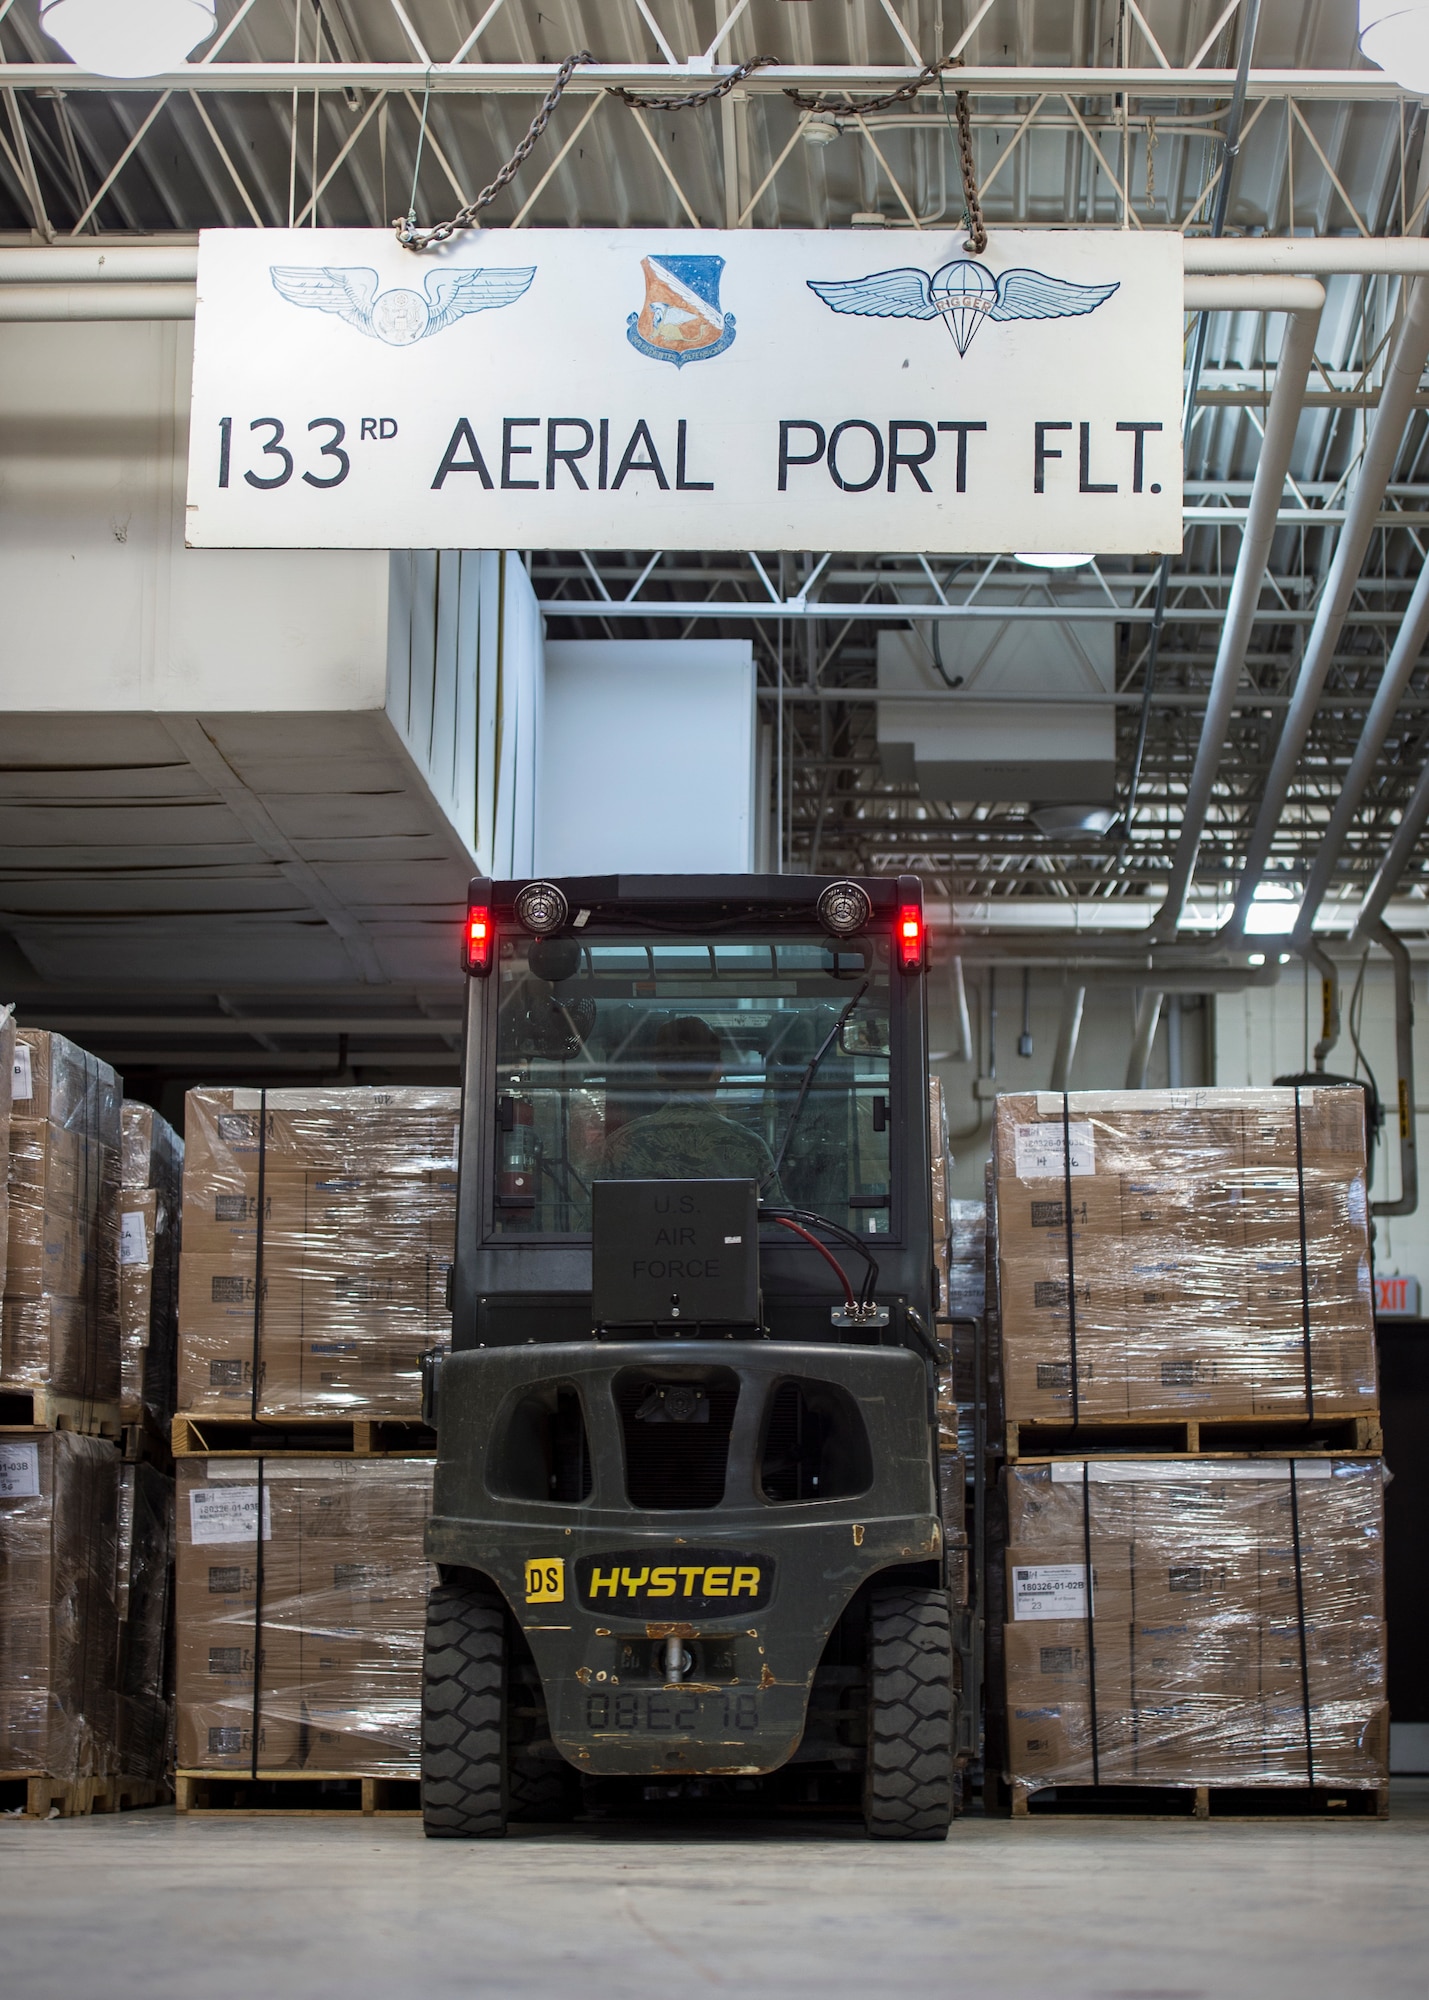 U.S. Air Force Airmen from with the 133rd Small Air Terminal load boxes of food onto pallets in St. Paul, May 18, 2019.